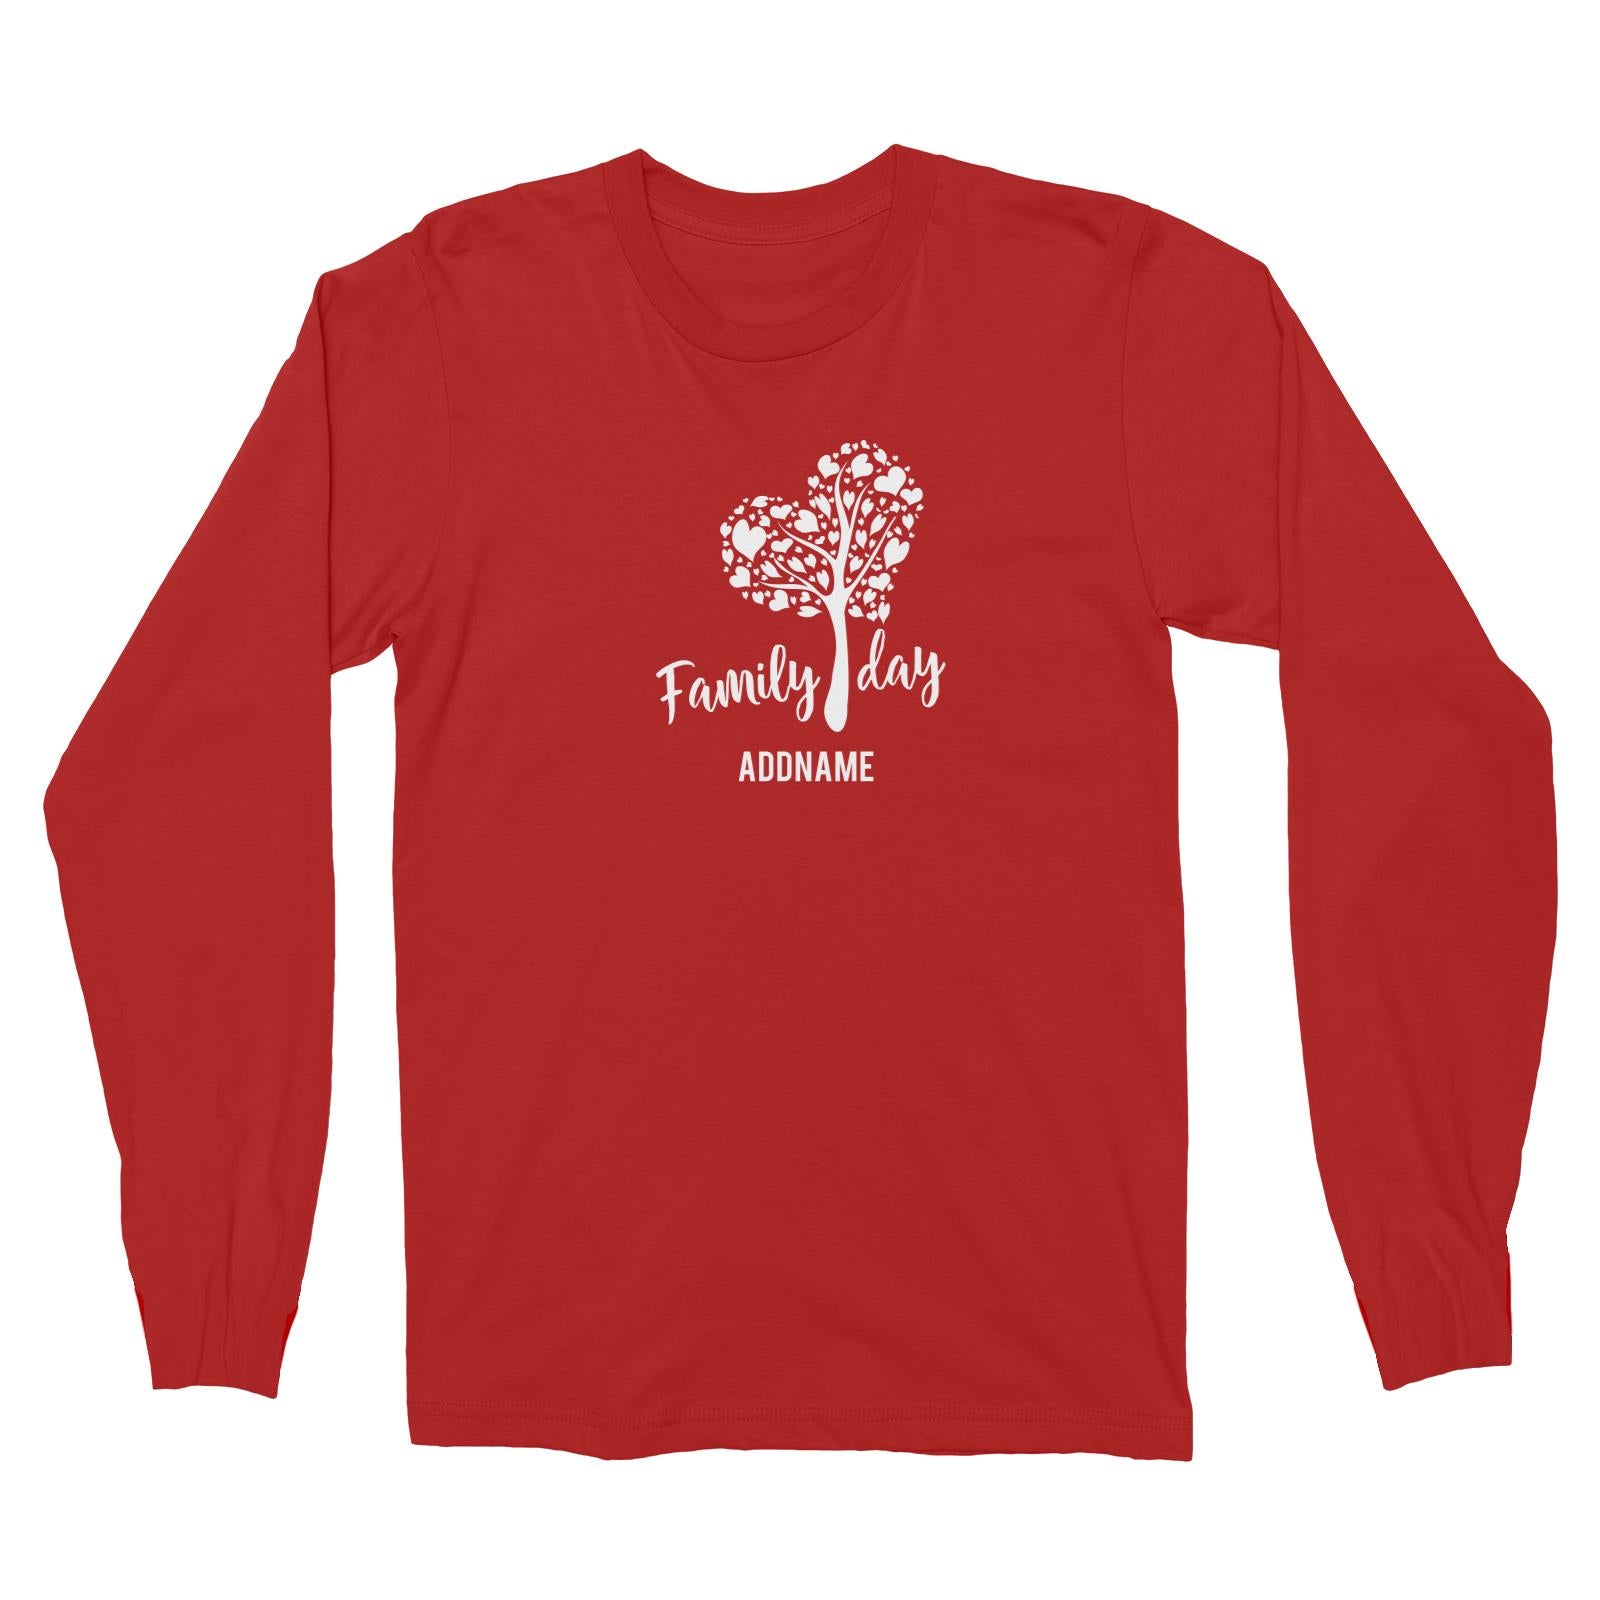 Family Day Love Tree With Love Leaves Family Day Addname Long Sleeve Unisex T-Shirt